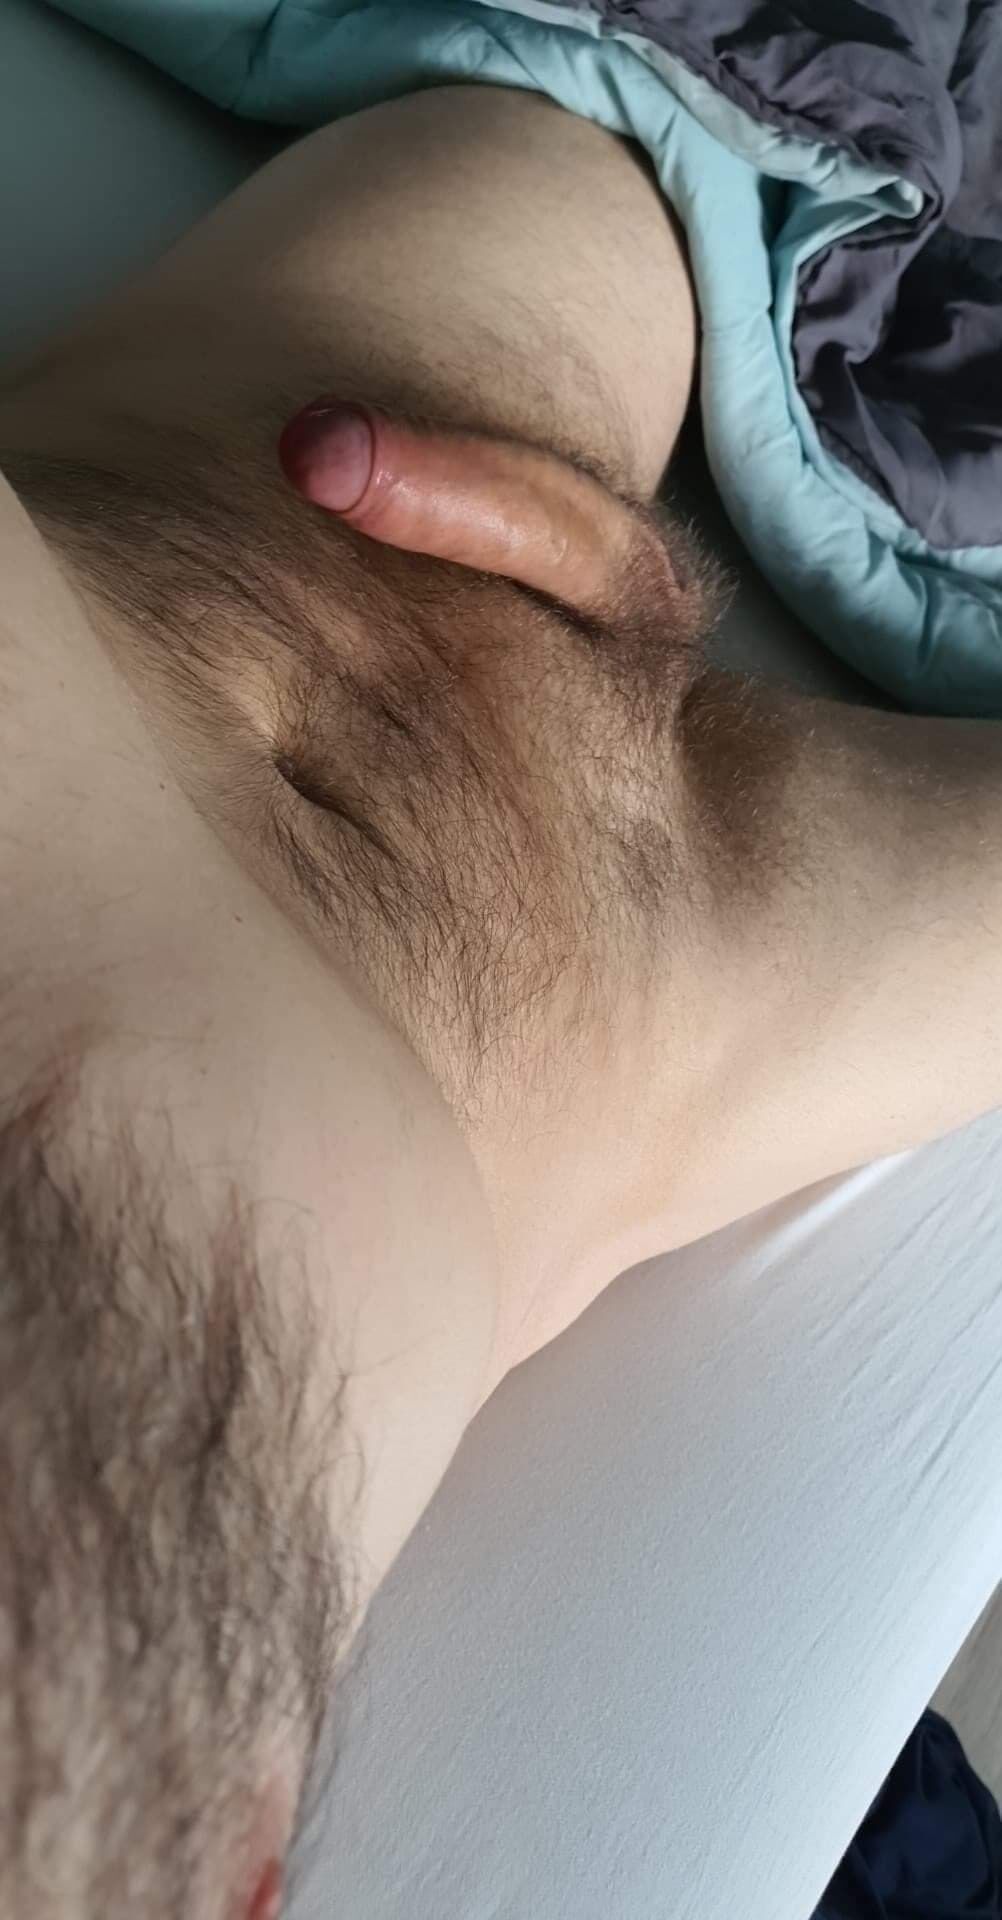 Me jerking off and my hairy ass #8